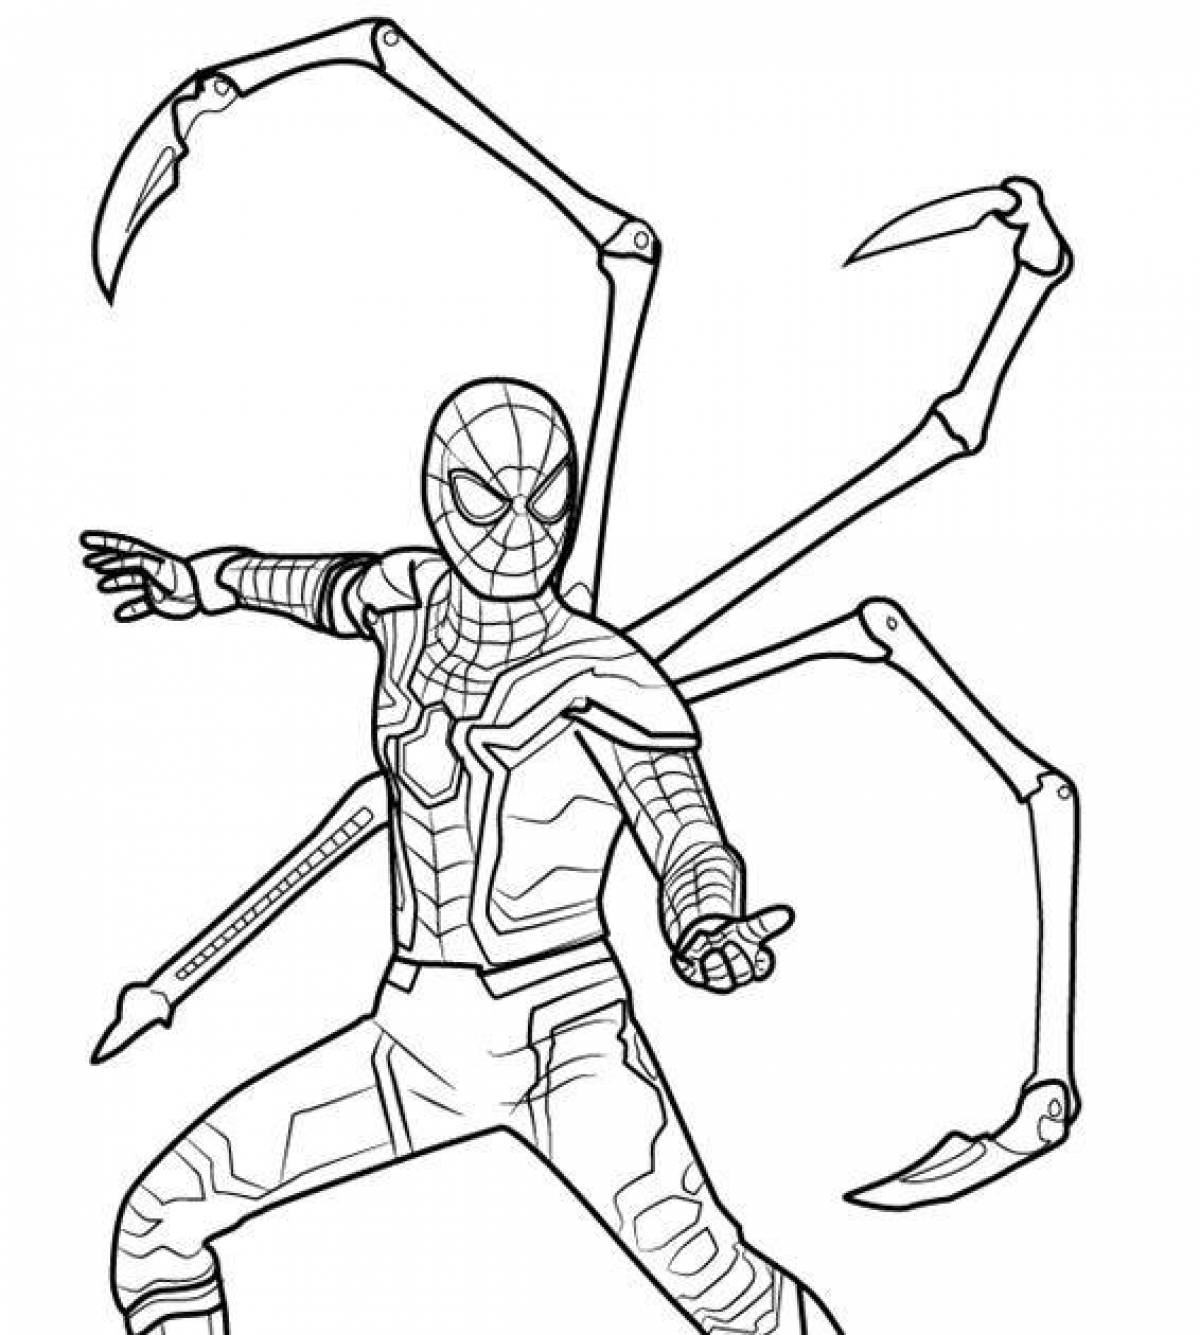 Gorgeous spiderman no way home coloring book